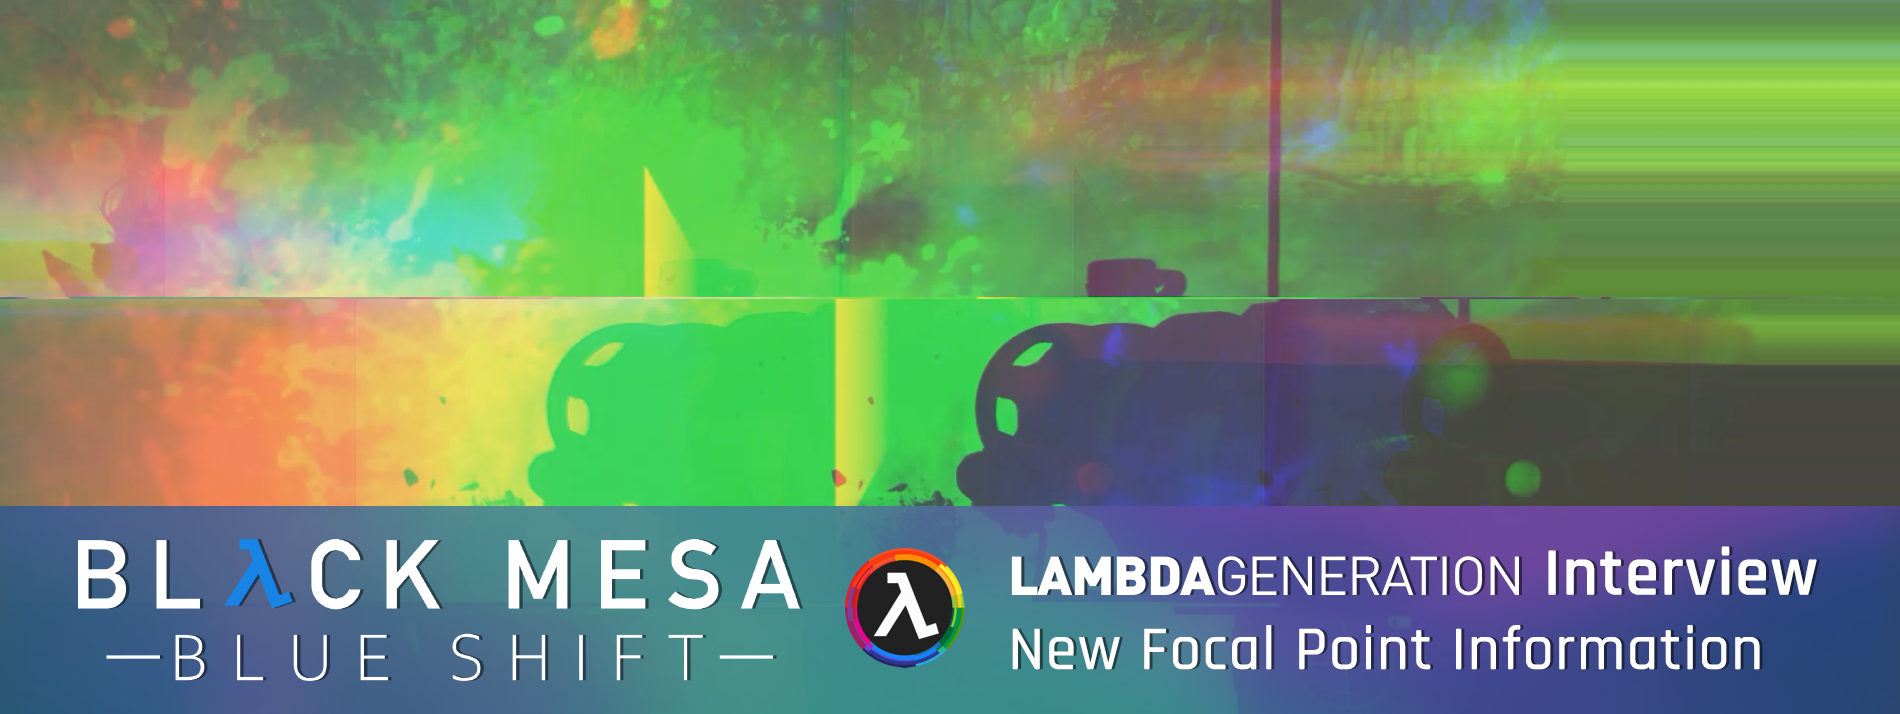 LambdaGeneration Interview | New Focal Point Information